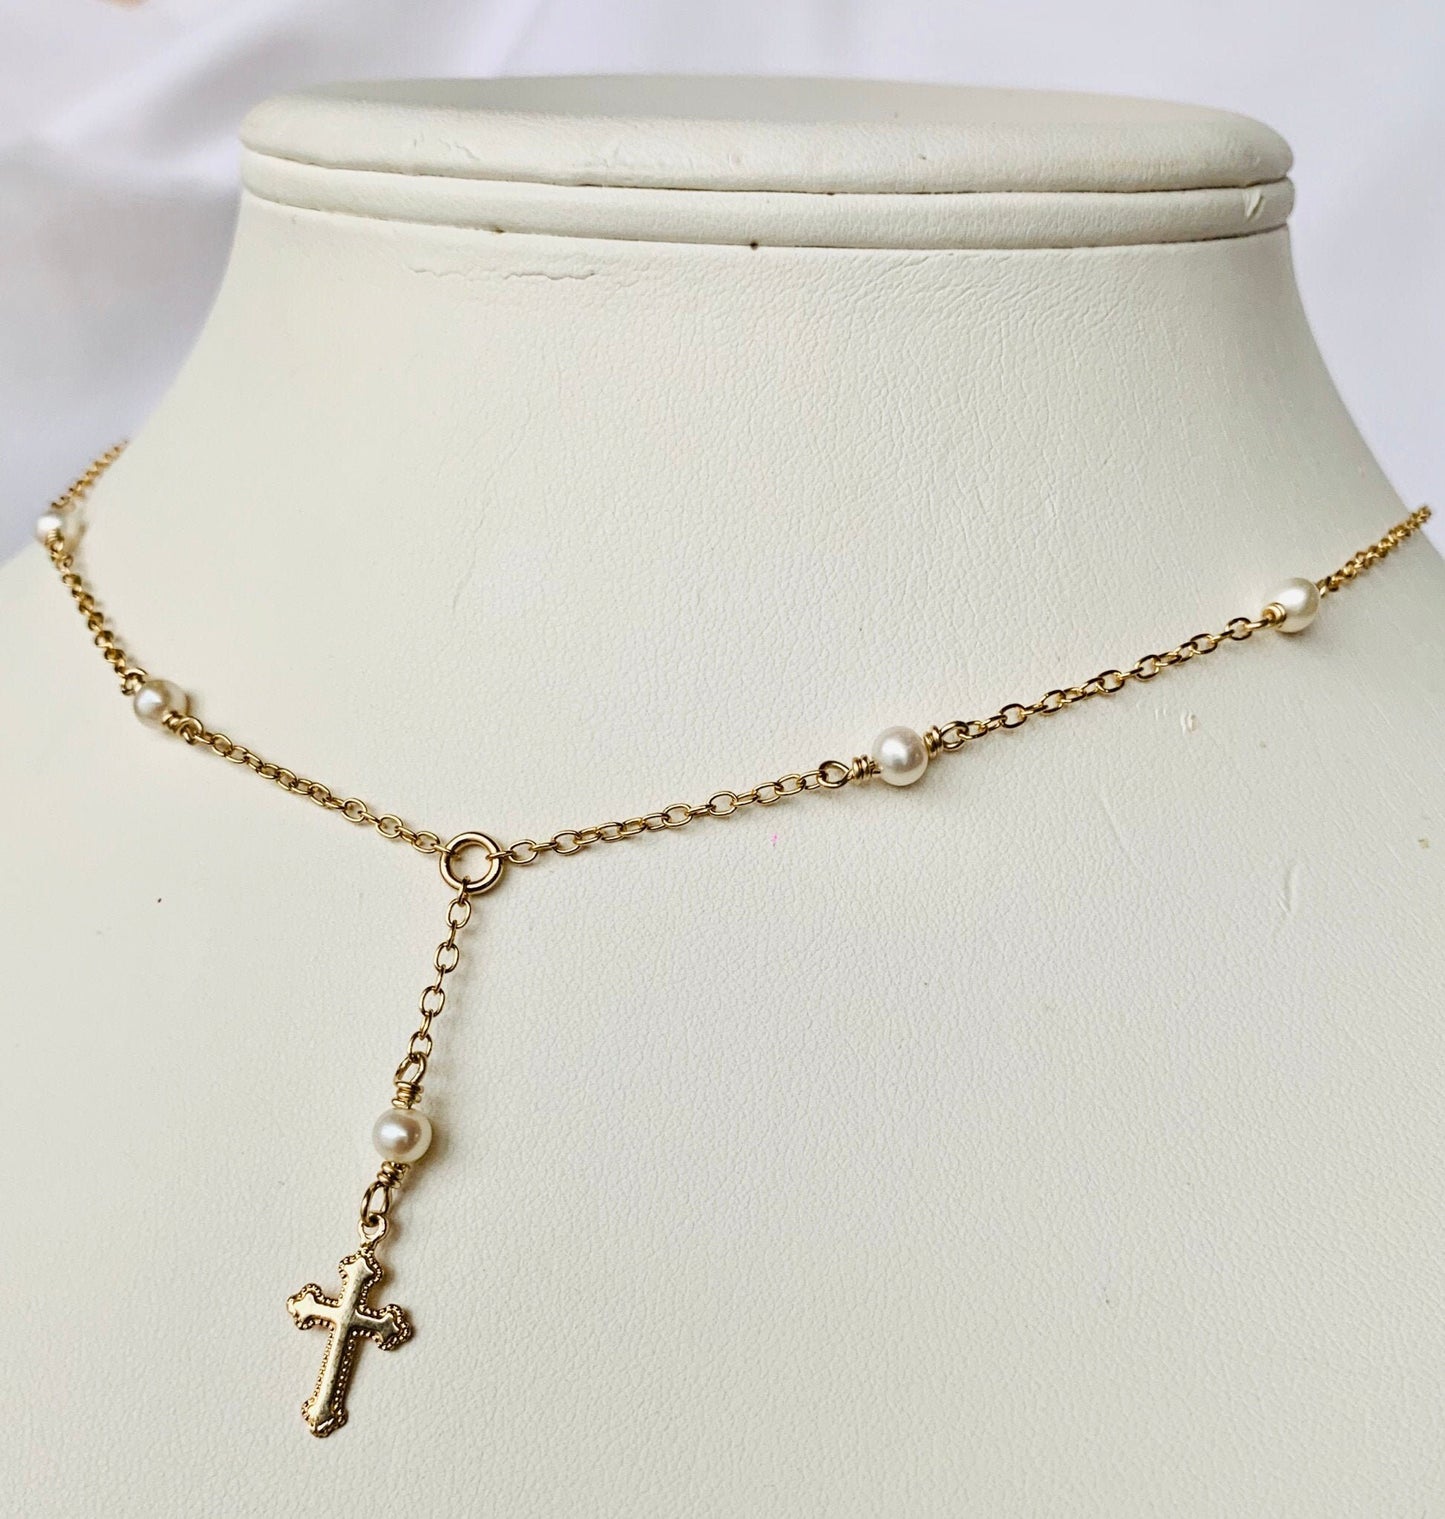 Gold Cross and Pearl Necklace,Gold Cross Necklace,First Communion Necklace,Everyday Religious Jewelry,Catholic Gift,Confirmation Necklace